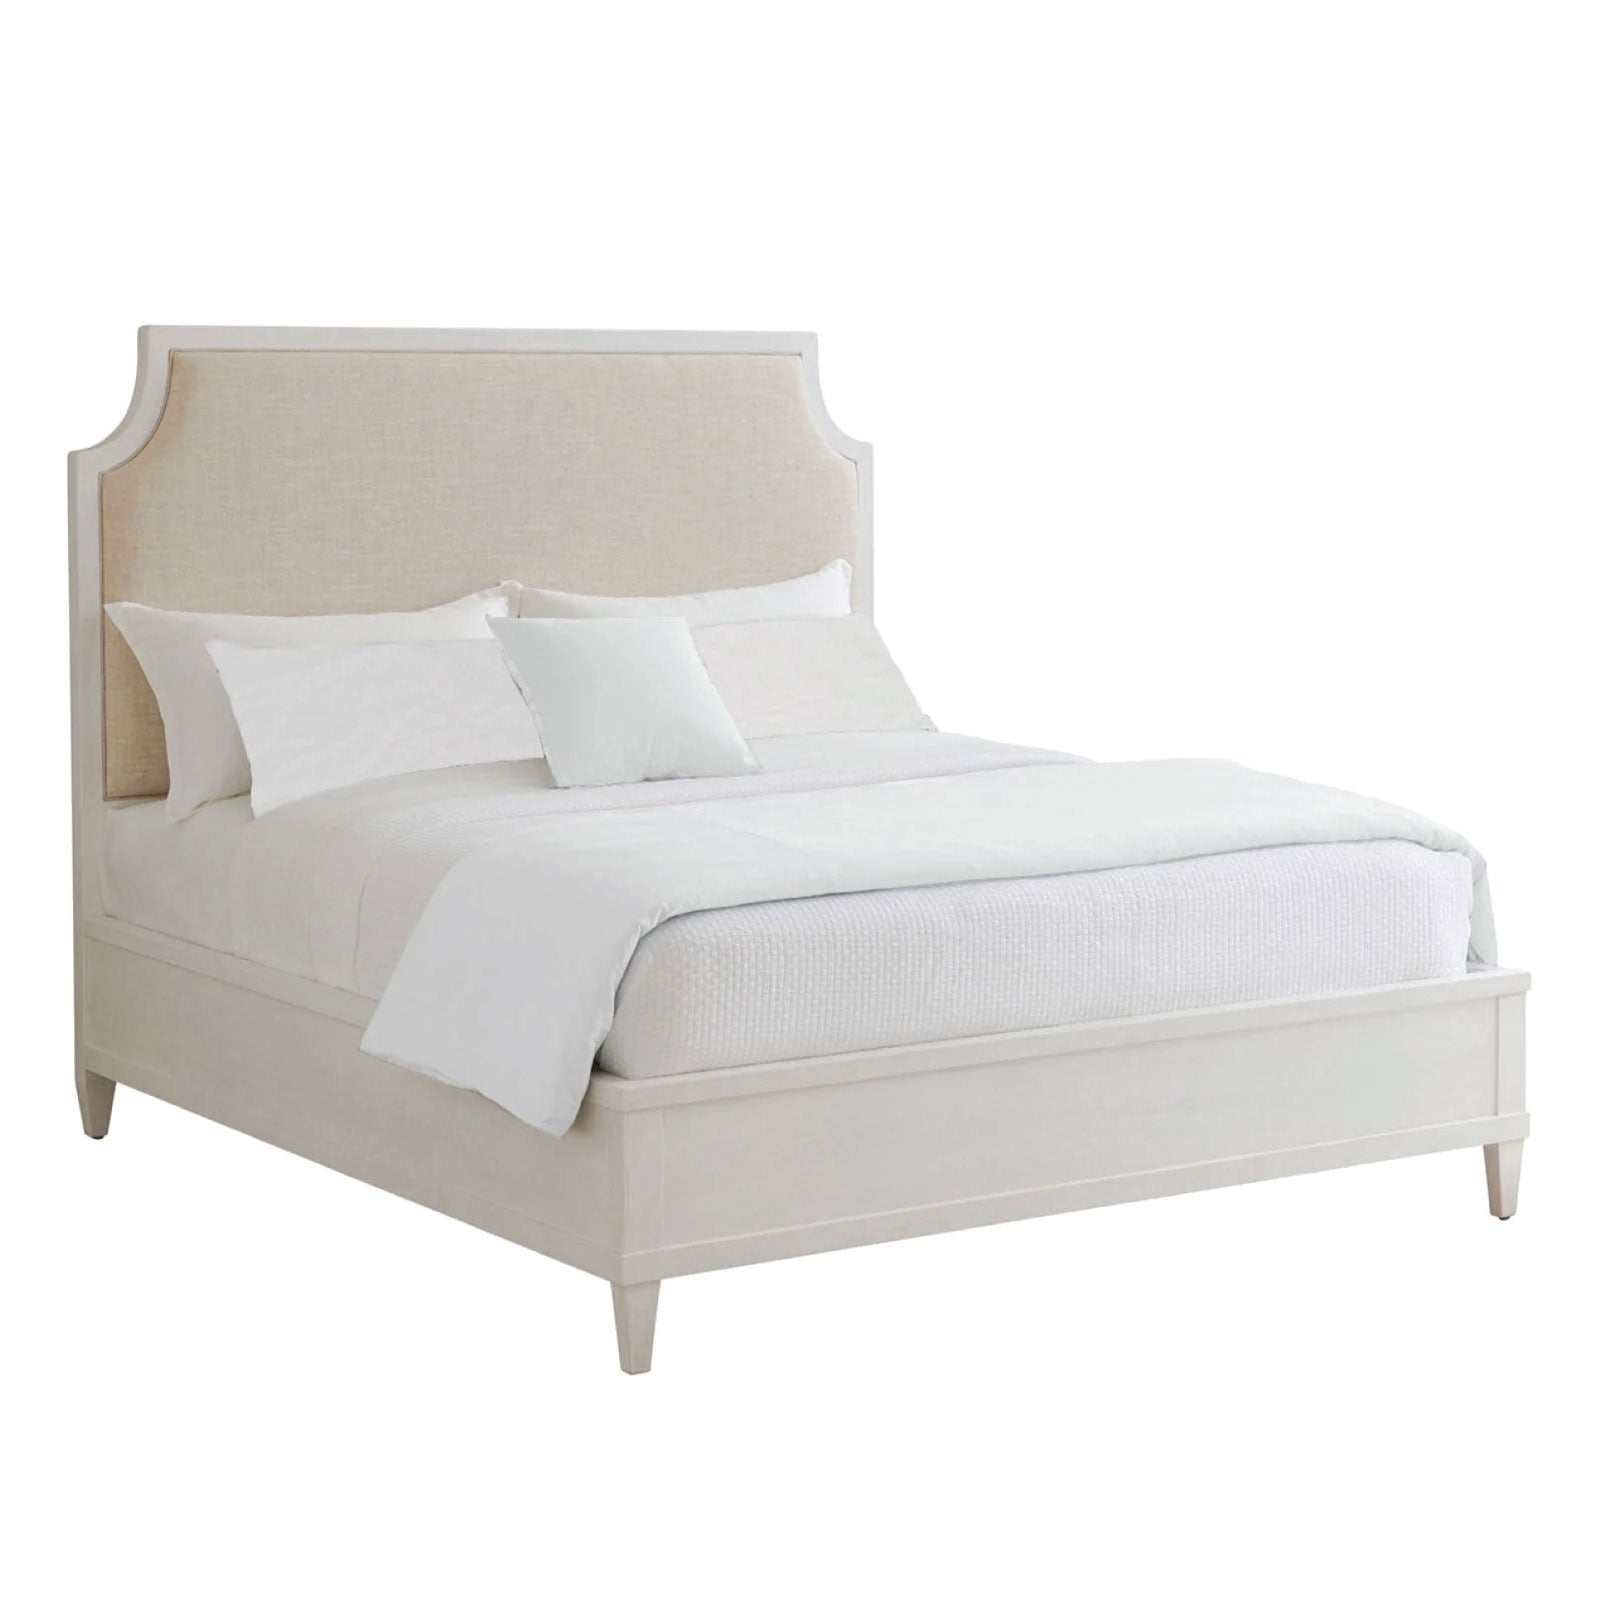 Wood bed frame upholstered headboard is complemented with sandy white performance fabric that has the look and feel of woven linen